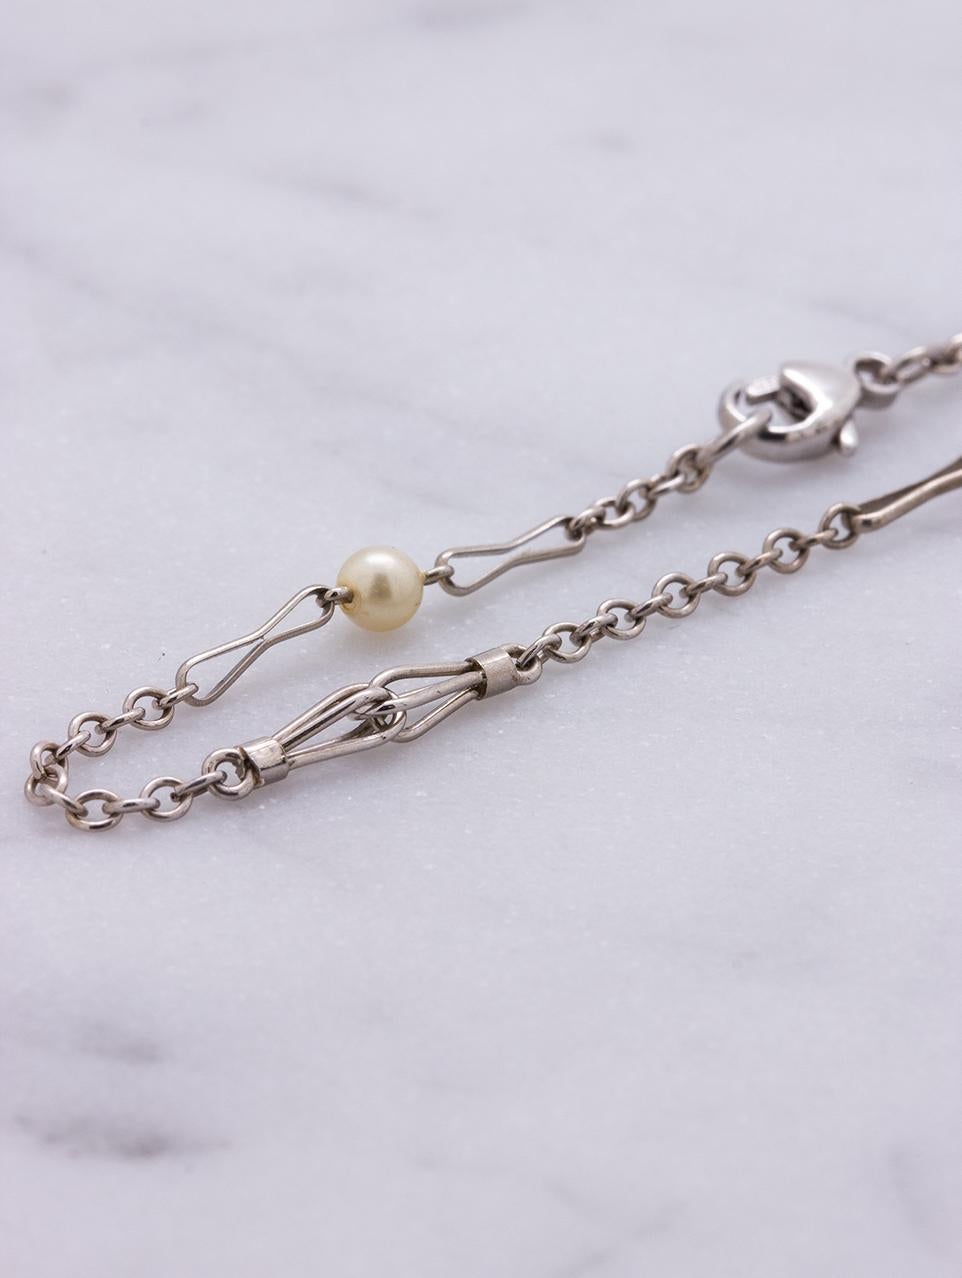 Edwardian Antique 14 Karat White Gold and Pearl Chain Bracelet, circa 1920s For Sale